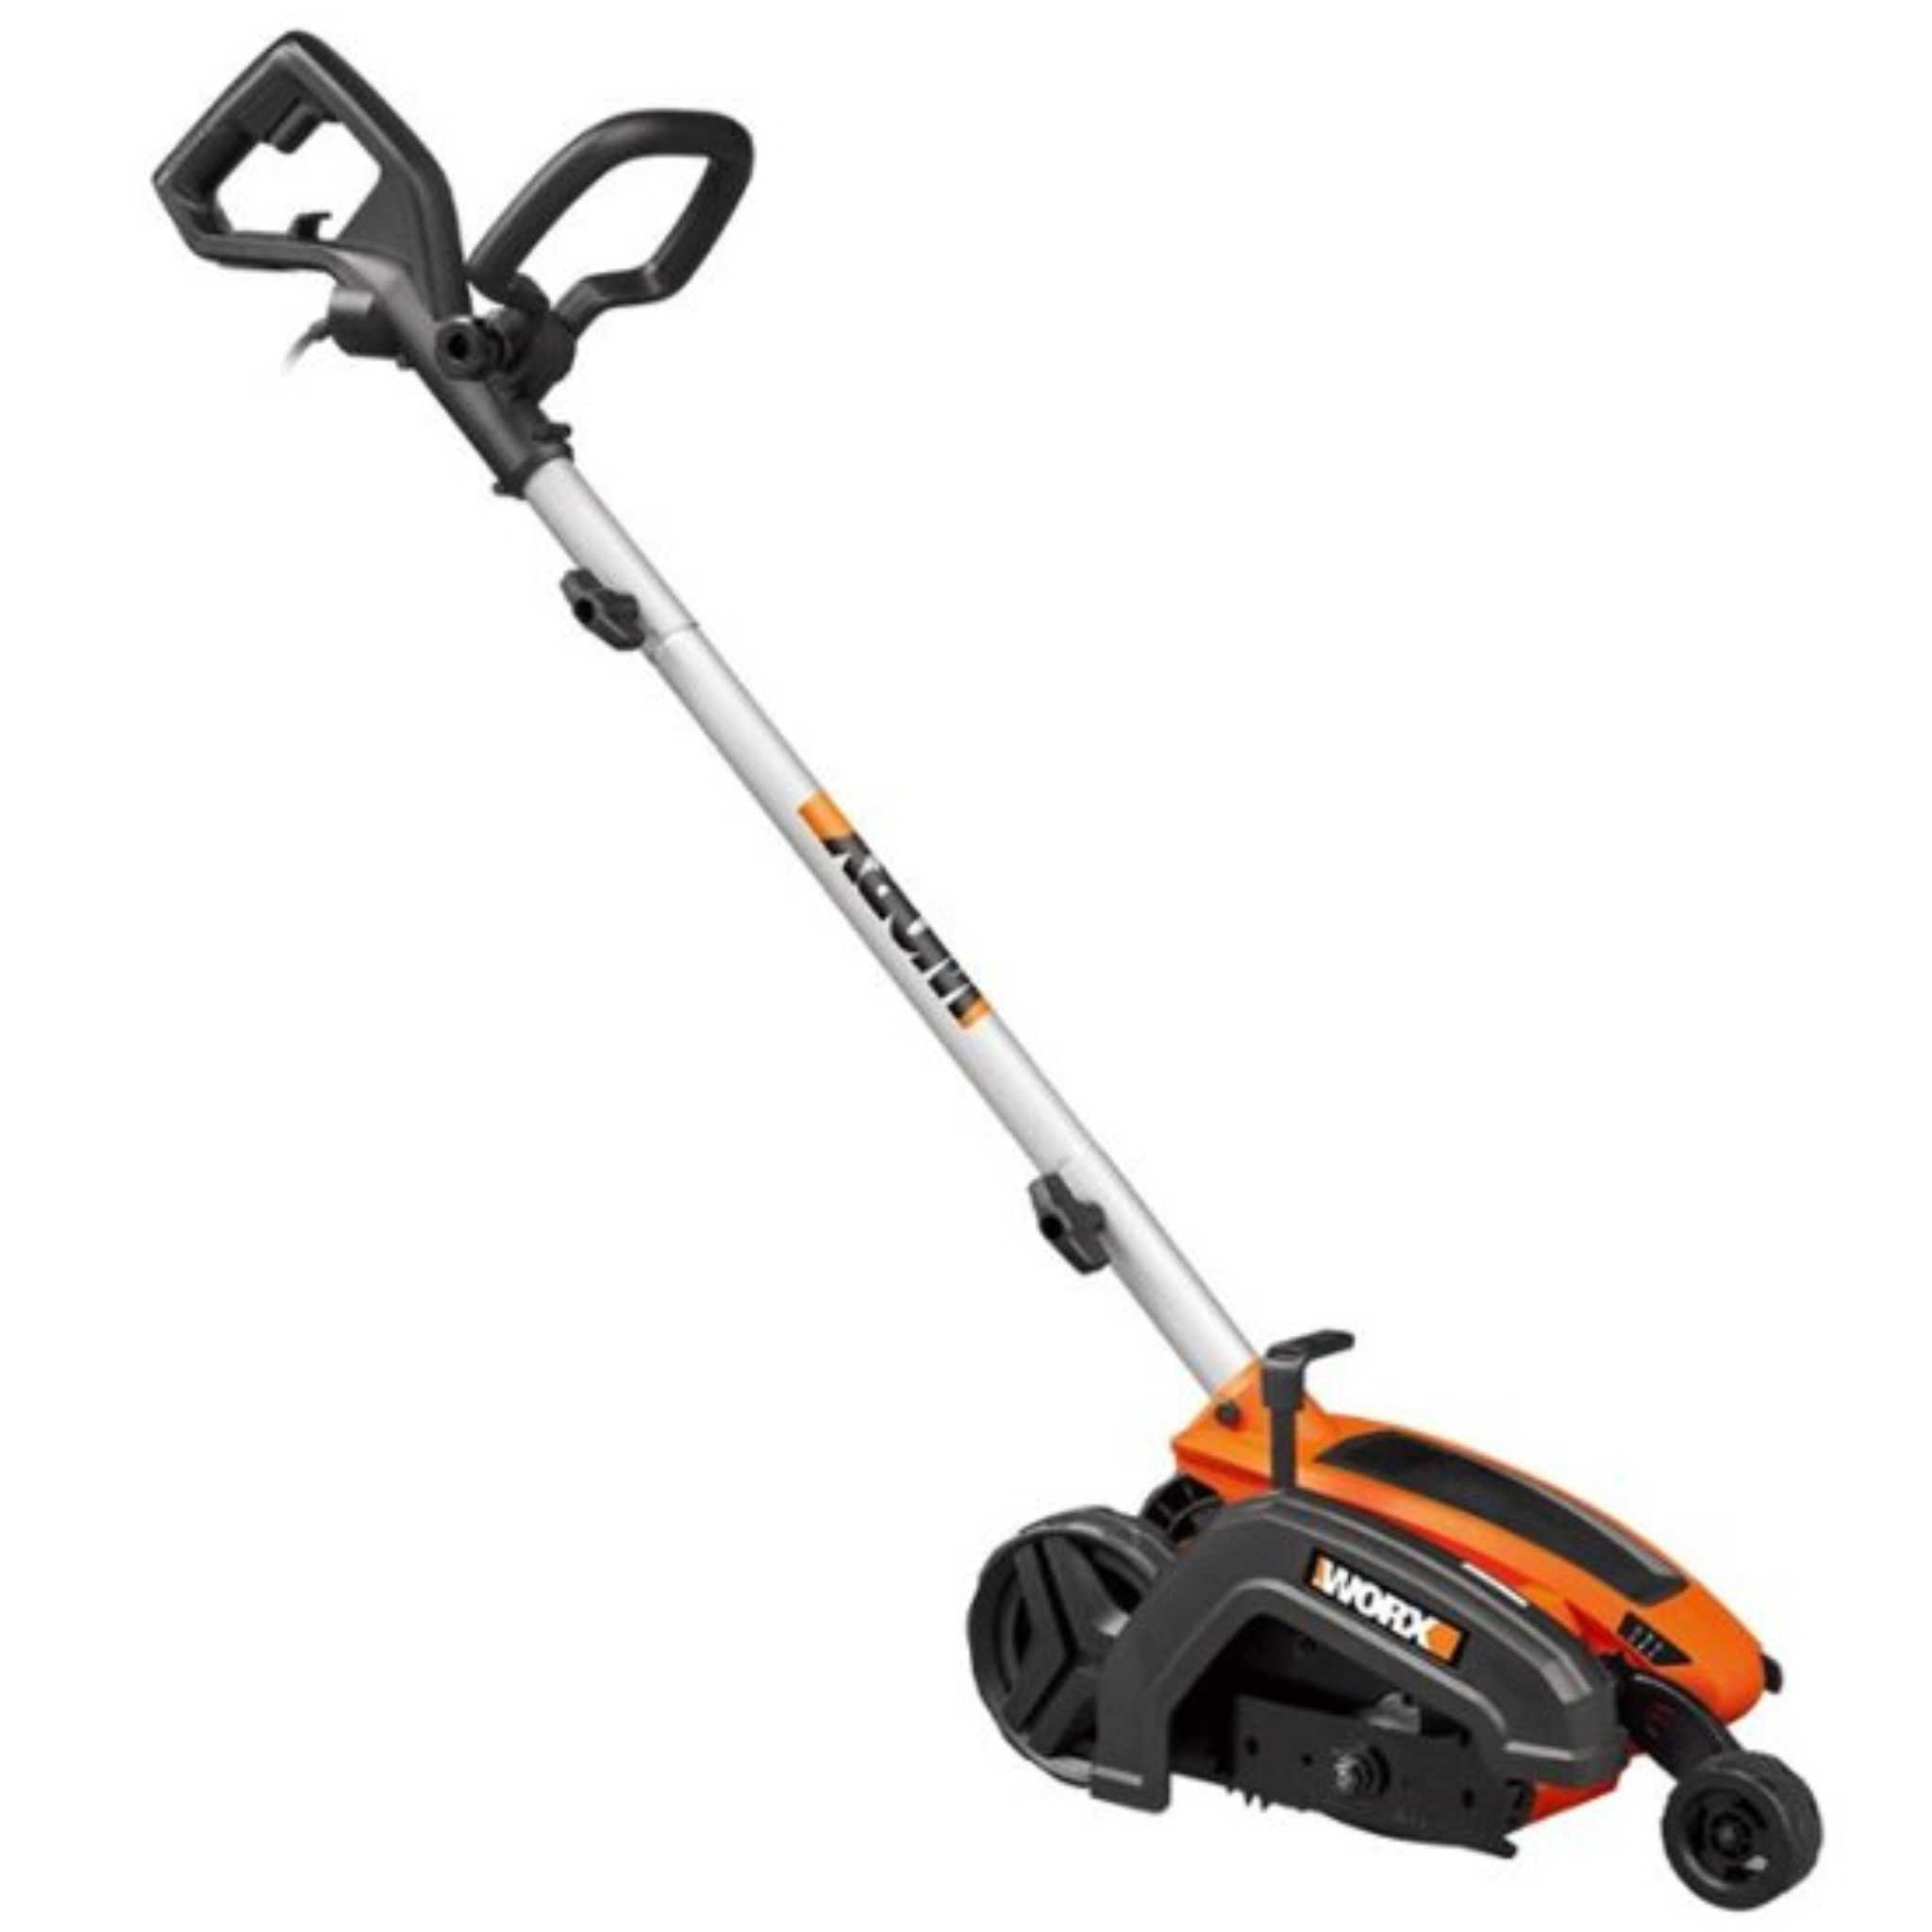 Worx WG896 7.5 in. 12 Amp Electric Lawn Edger & Trencher